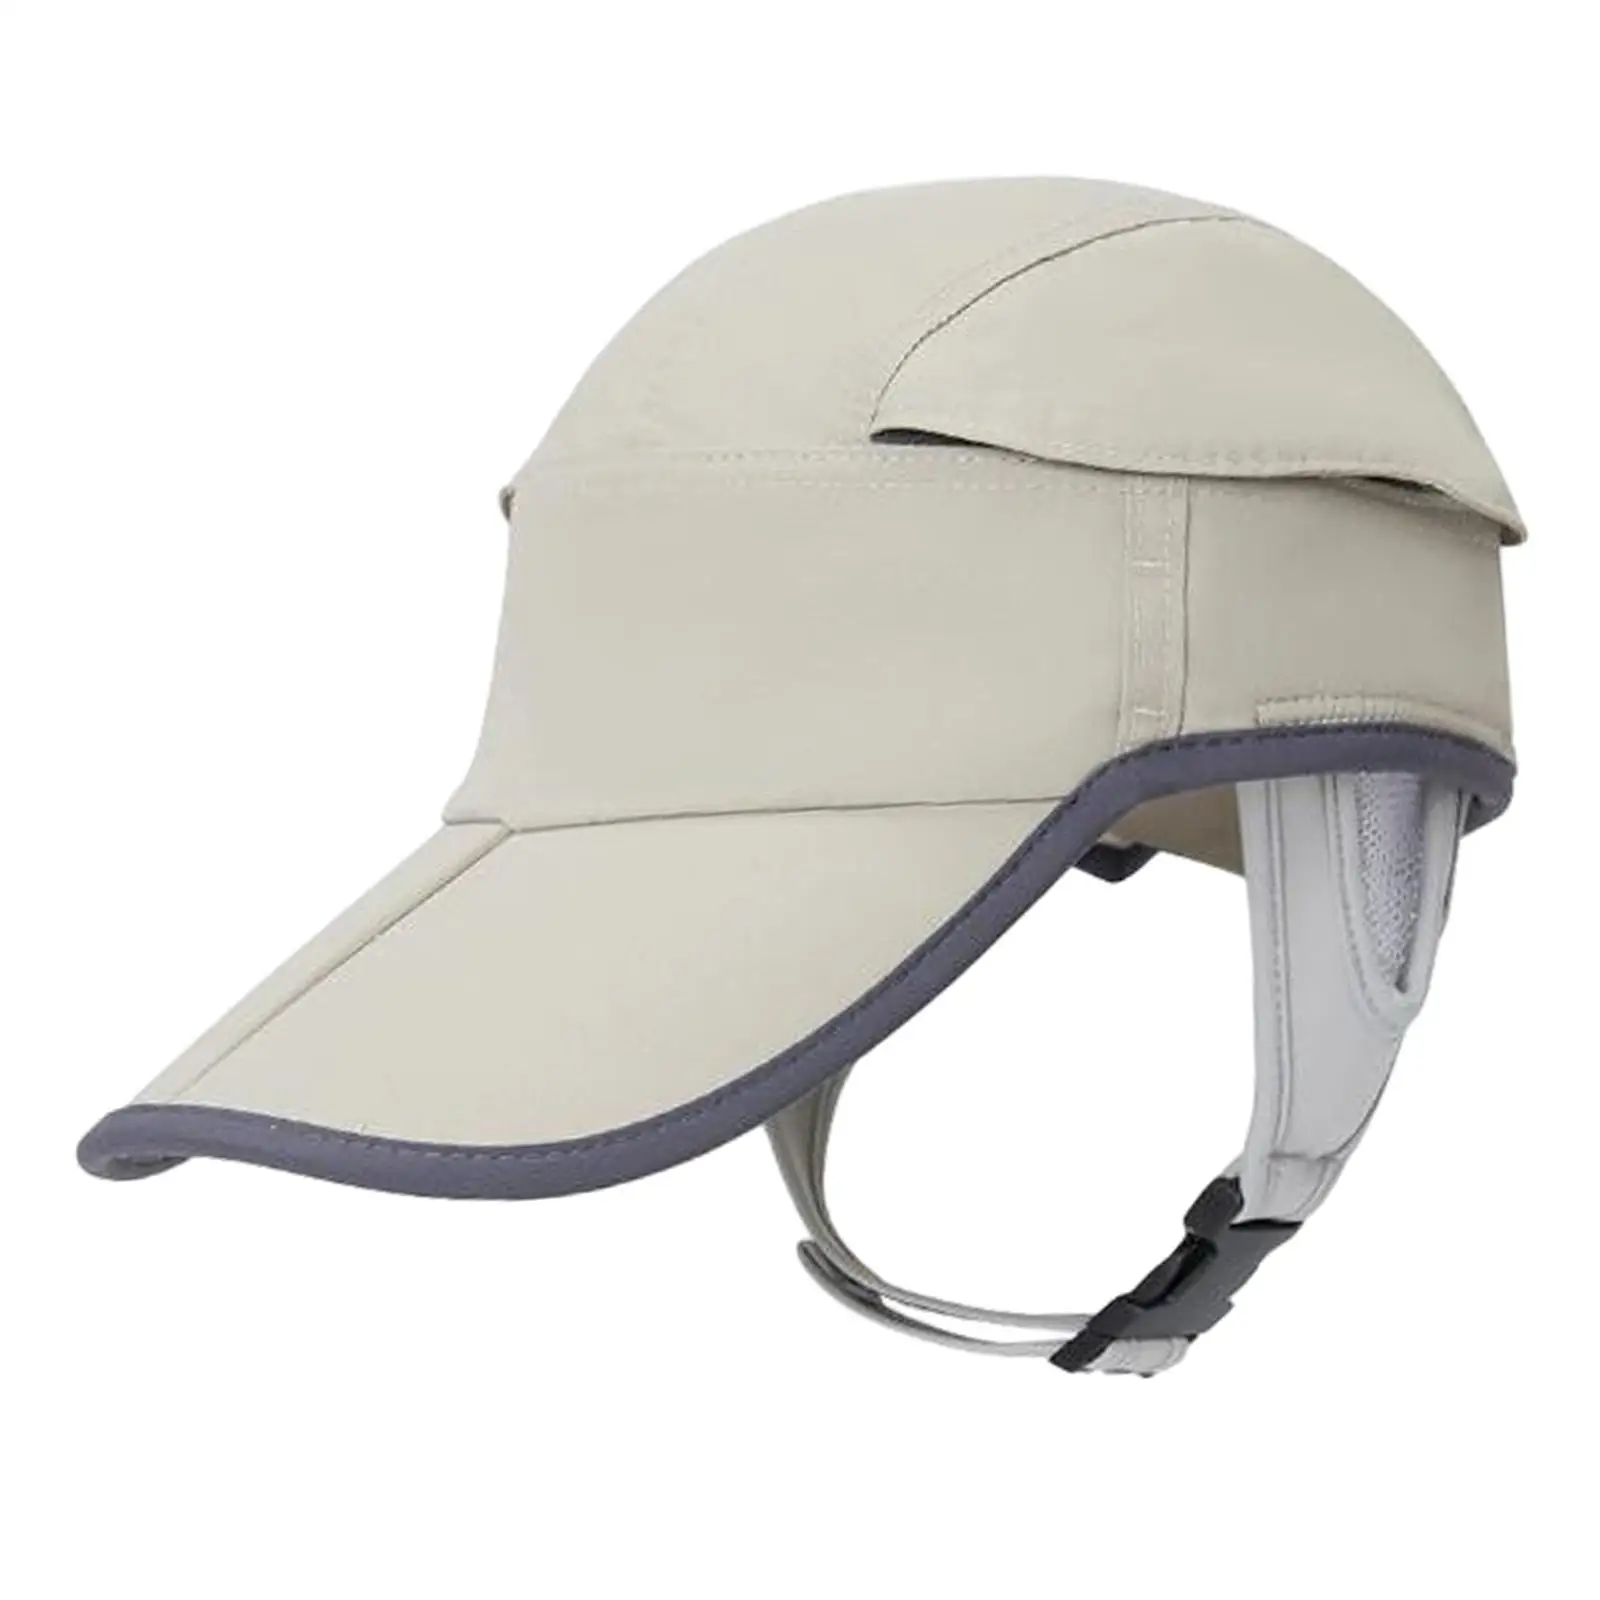 Baseball Cap for Men Comfortable to Wear Fisherman Hat Surfing Hat Sun Visor Hat for Golf Outdoor Sports Fishing Beach Camping